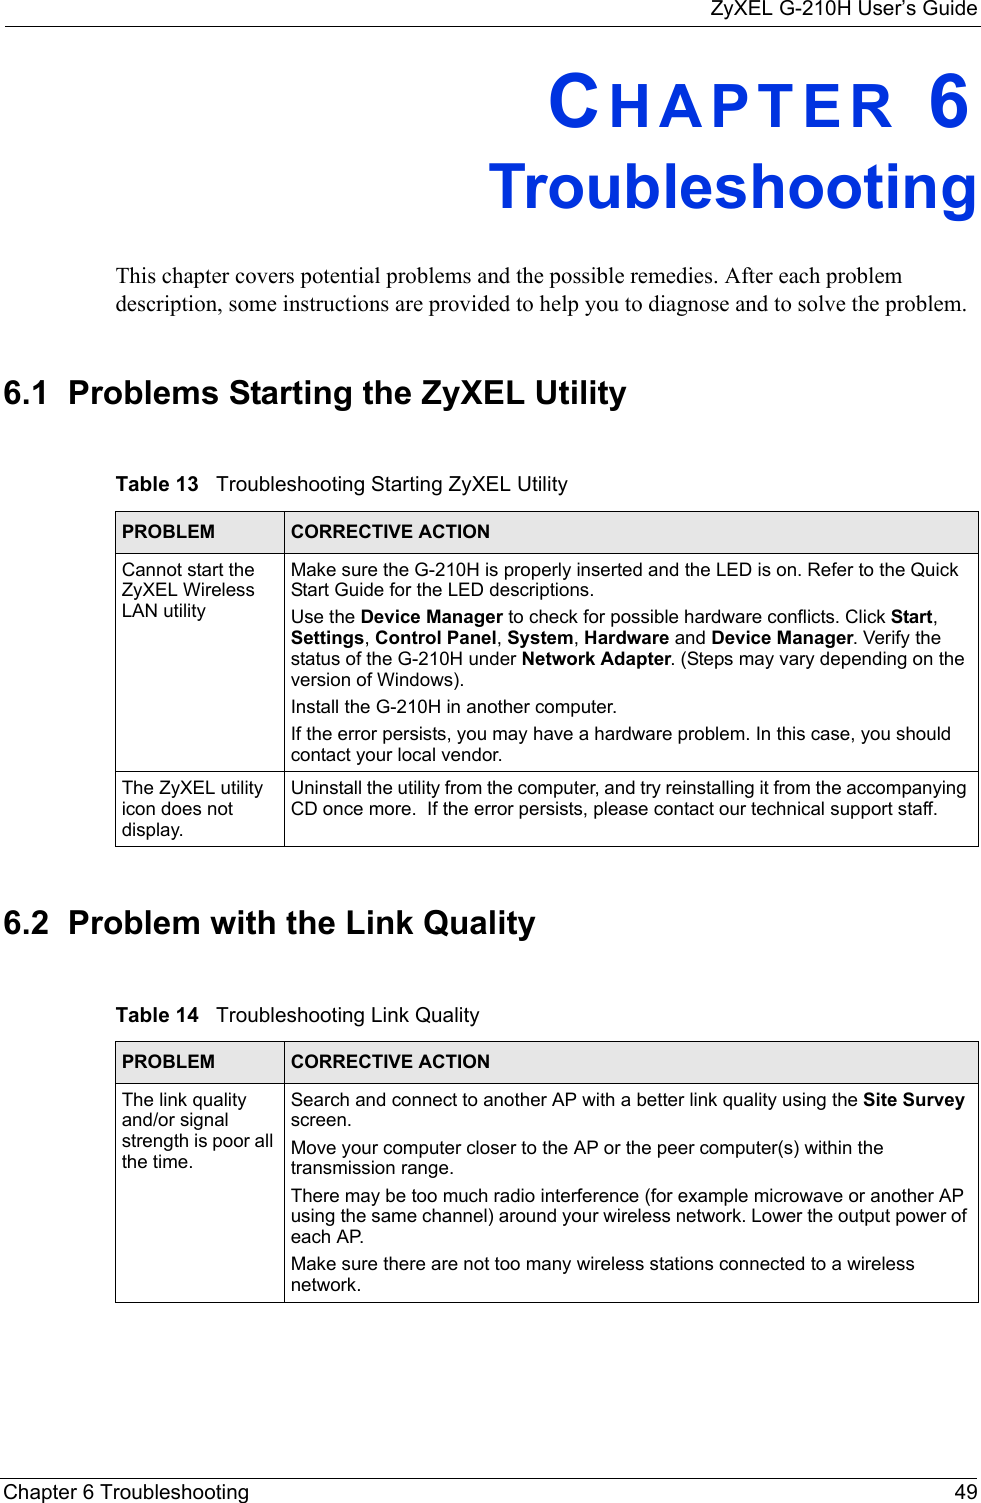 ZyXEL G-210H User’s GuideChapter 6 Troubleshooting 49CHAPTER 6   TroubleshootingThis chapter covers potential problems and the possible remedies. After each problem description, some instructions are provided to help you to diagnose and to solve the problem.6.1  Problems Starting the ZyXEL Utility 6.2  Problem with the Link QualityTable 13   Troubleshooting Starting ZyXEL Utility  PROBLEM CORRECTIVE ACTIONCannot start the ZyXEL Wireless LAN utilityMake sure the G-210H is properly inserted and the LED is on. Refer to the Quick Start Guide for the LED descriptions.Use the Device Manager to check for possible hardware conflicts. Click Start, Settings, Control Panel, System, Hardware and Device Manager. Verify the status of the G-210H under Network Adapter. (Steps may vary depending on the version of Windows). Install the G-210H in another computer.If the error persists, you may have a hardware problem. In this case, you should contact your local vendor.The ZyXEL utility icon does not display.Uninstall the utility from the computer, and try reinstalling it from the accompanying CD once more.  If the error persists, please contact our technical support staff.  Table 14   Troubleshooting Link Quality PROBLEM CORRECTIVE ACTIONThe link quality and/or signal strength is poor all the time.Search and connect to another AP with a better link quality using the Site Survey screen.Move your computer closer to the AP or the peer computer(s) within the transmission range.There may be too much radio interference (for example microwave or another AP using the same channel) around your wireless network. Lower the output power of each AP.Make sure there are not too many wireless stations connected to a wireless network.